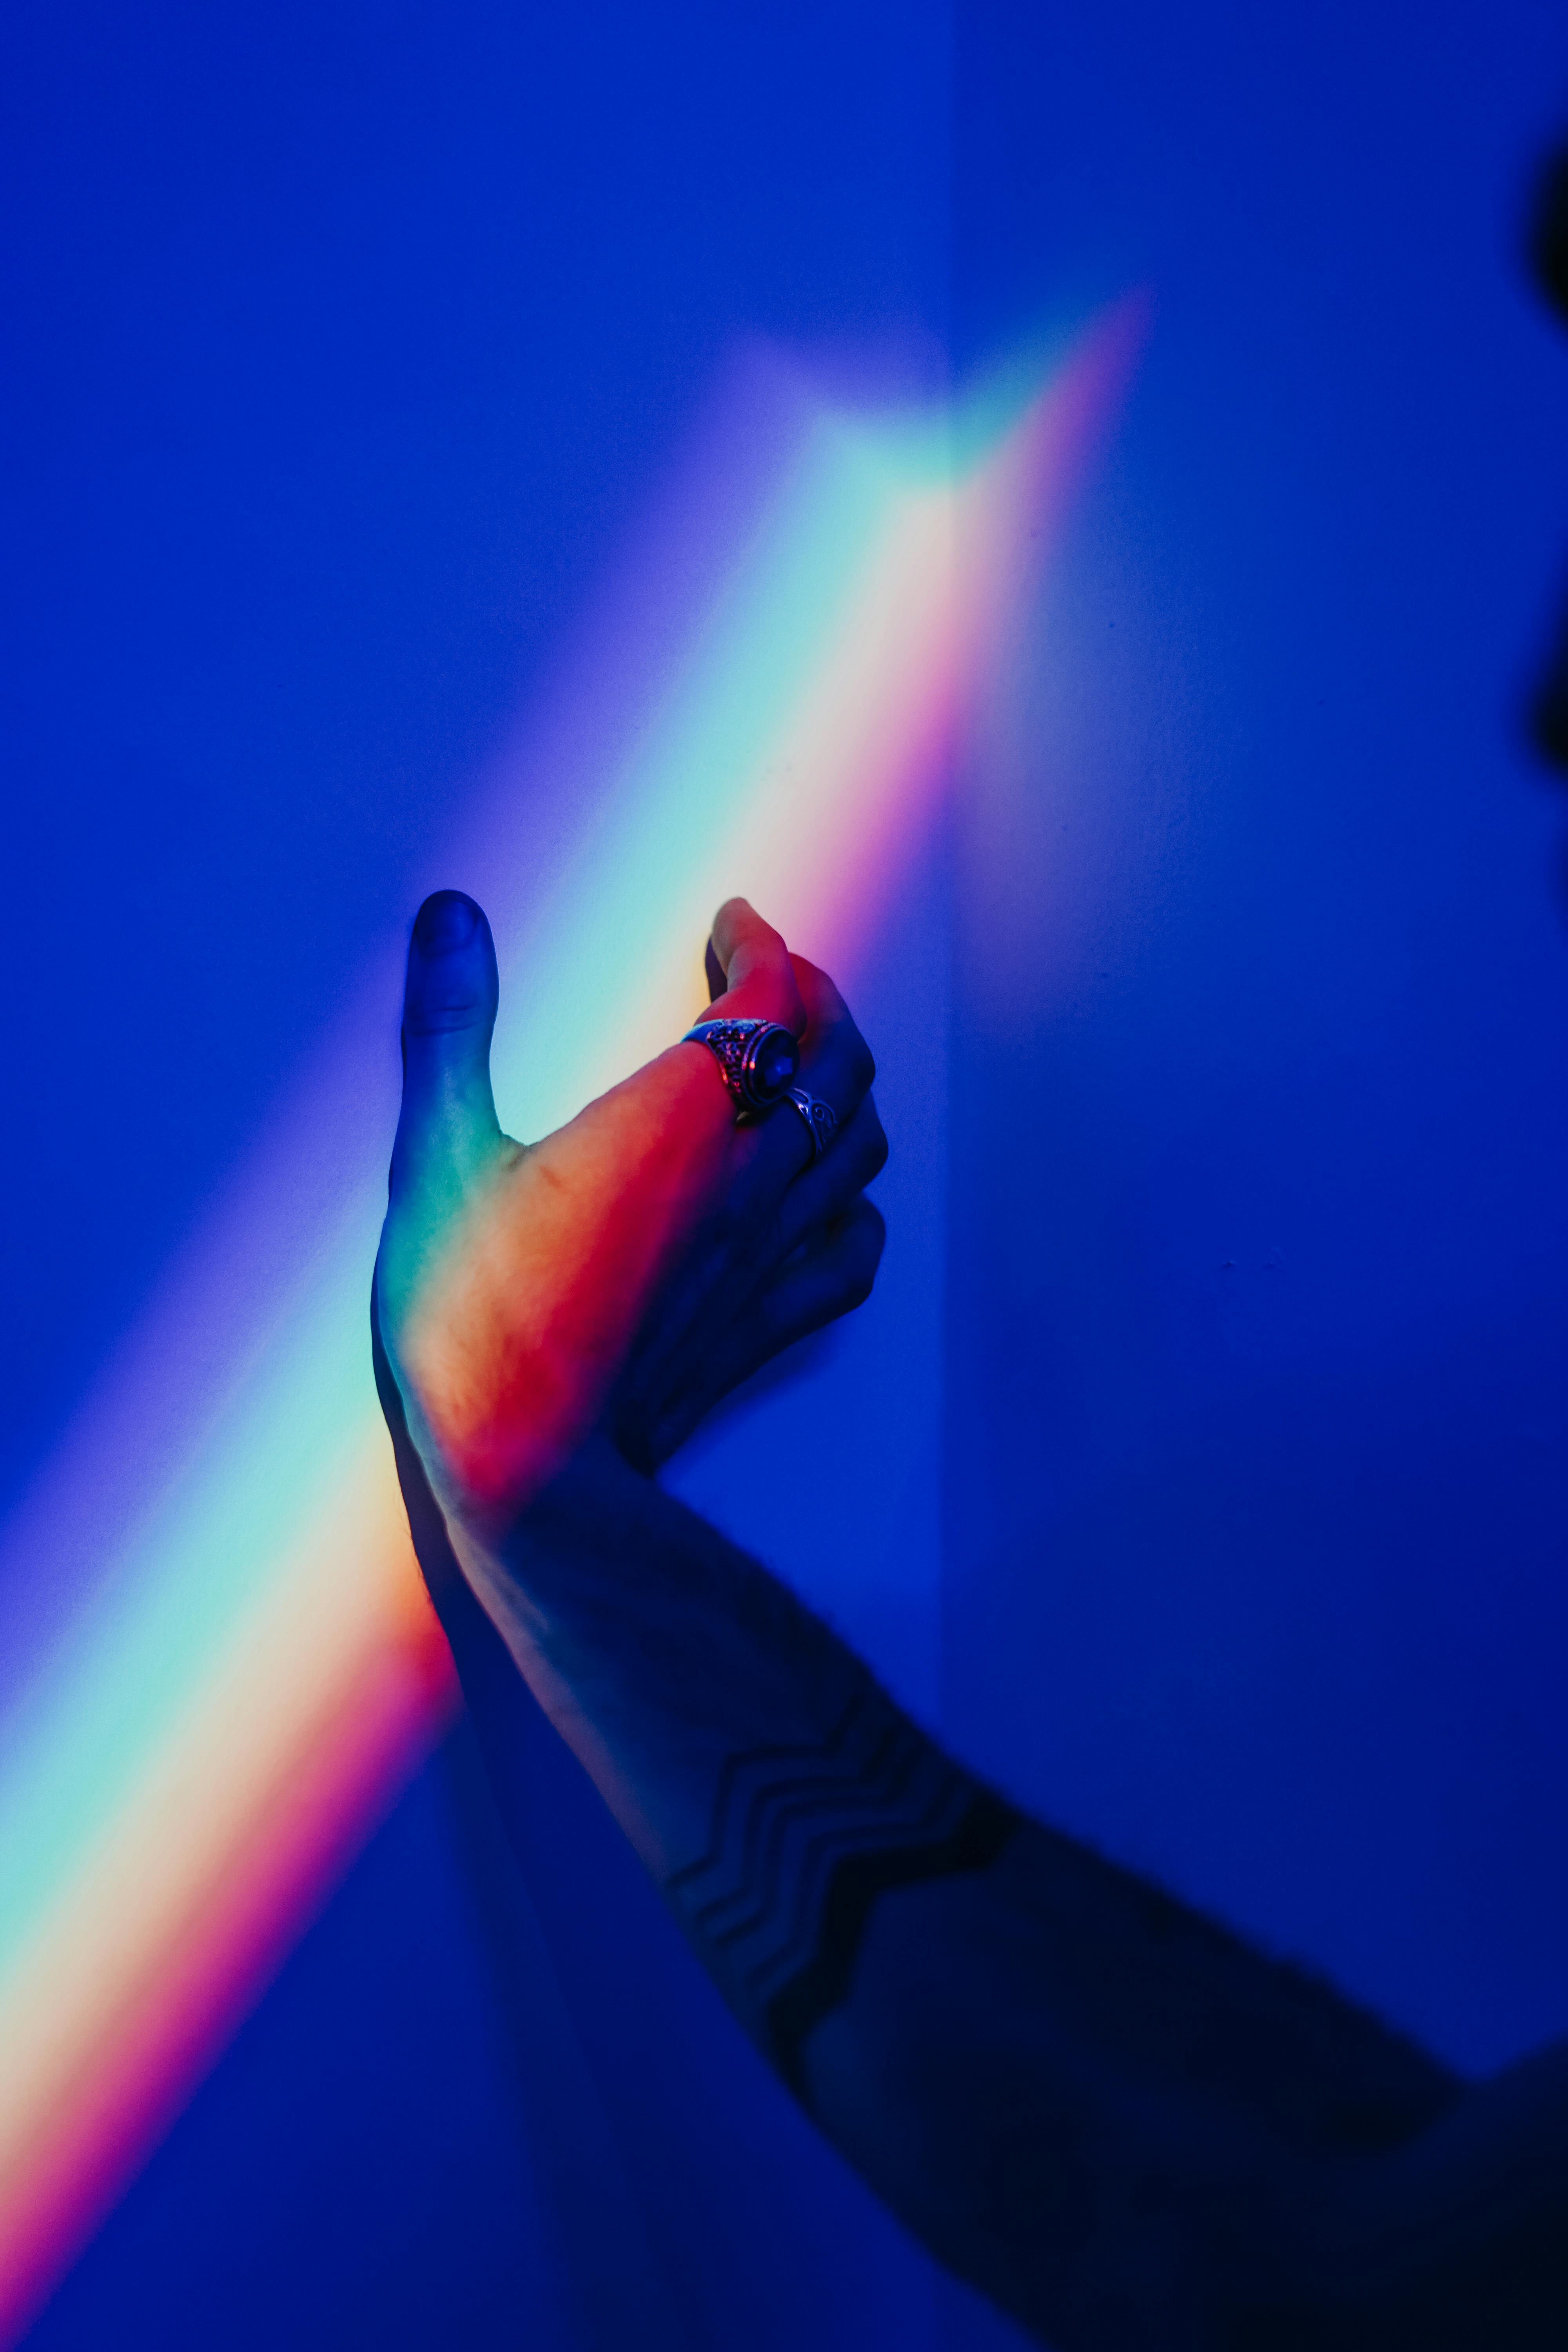 photo of person s hand touching the wall with rainbow colors